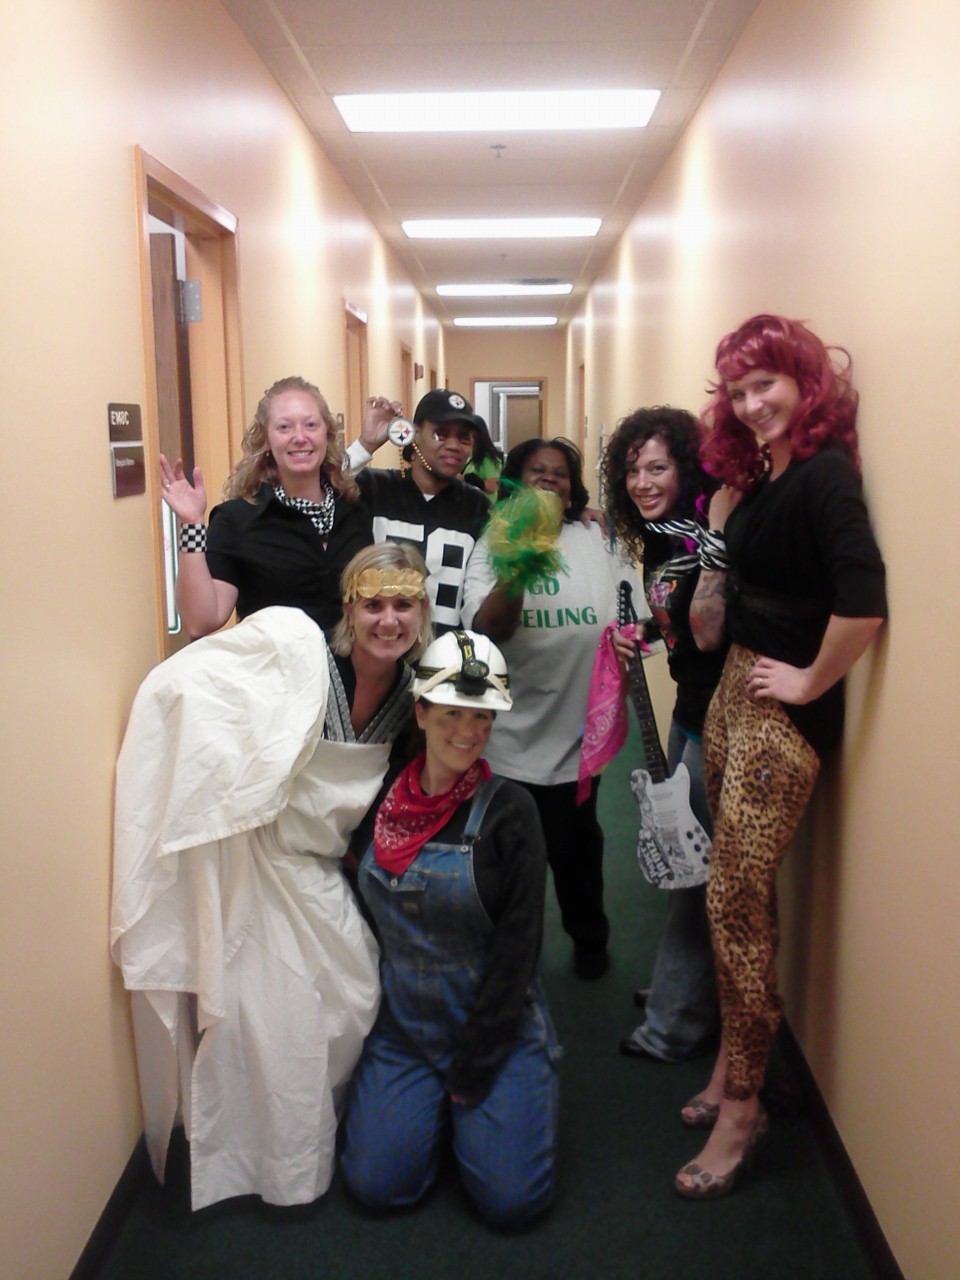 Photo of employees from the Admissions and Financial Aid offices dressed up for Halloween at the office.